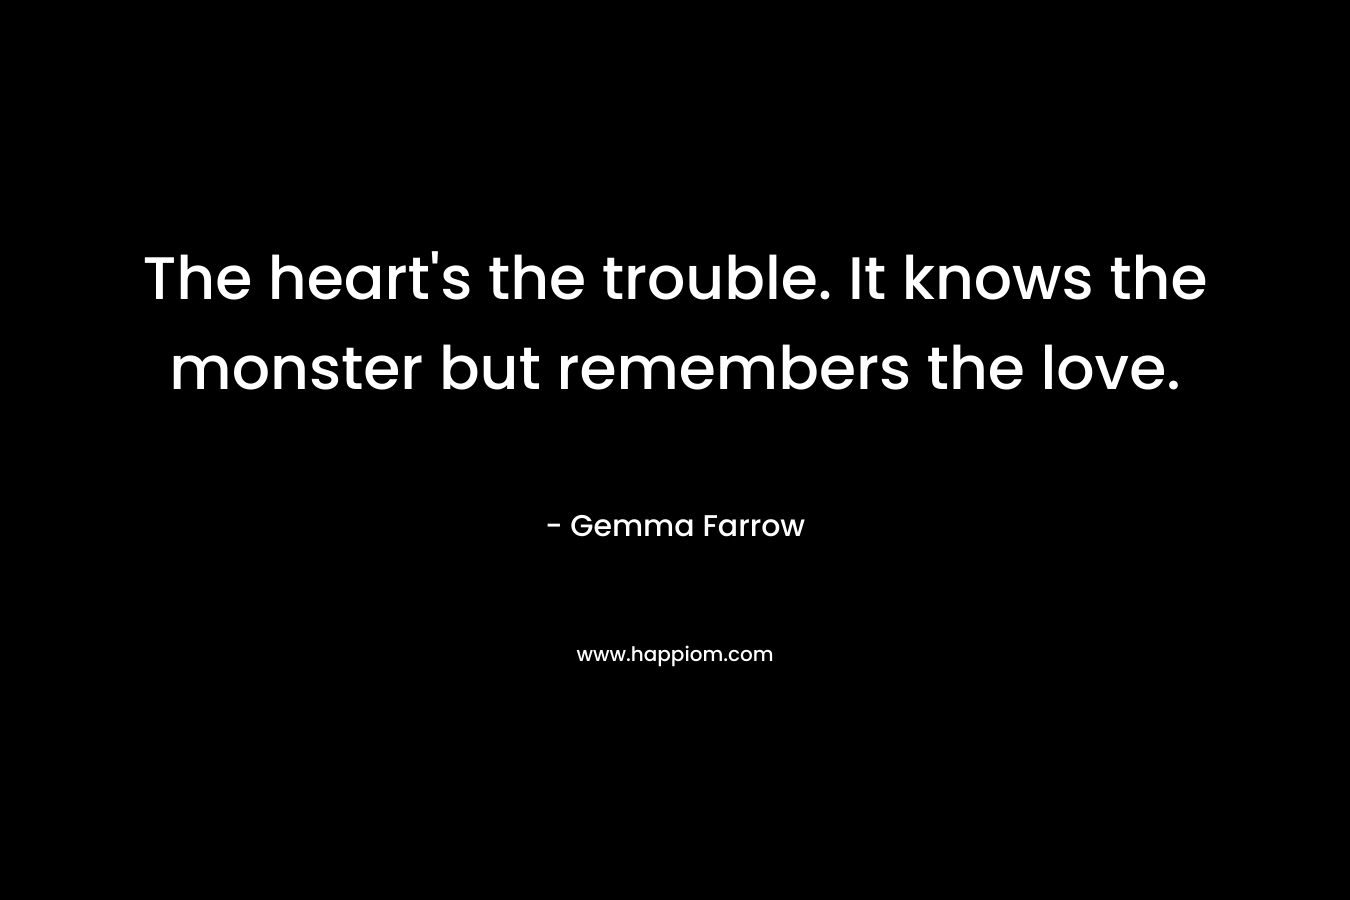 The heart's the trouble. It knows the monster but remembers the love.